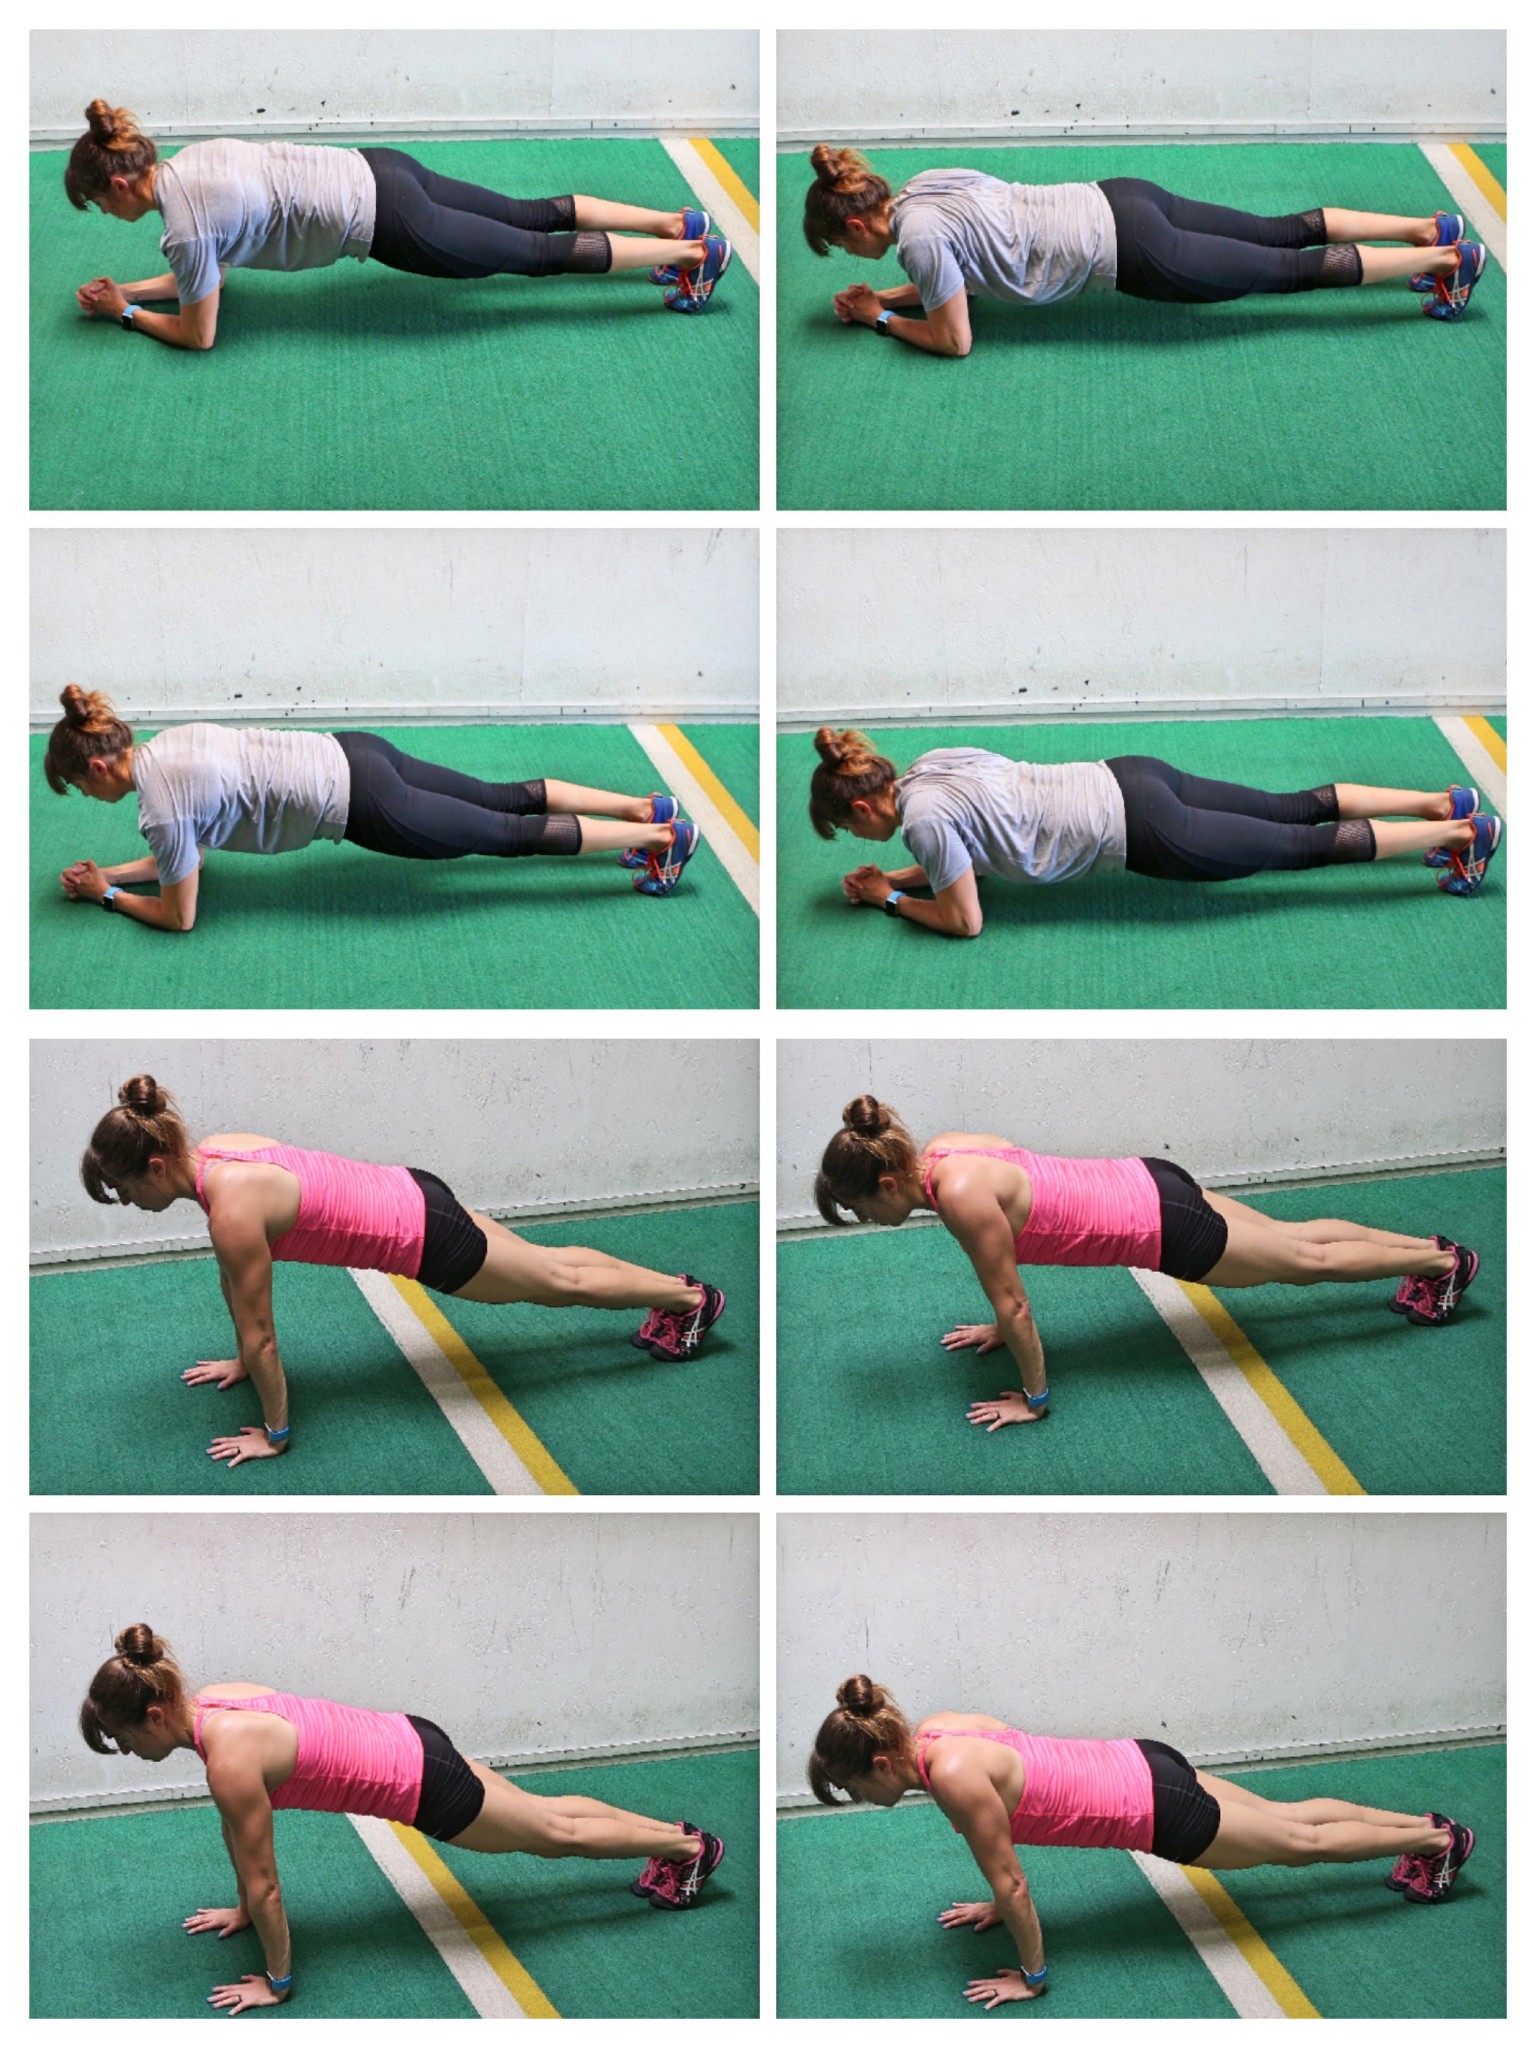 A List of Ways You Can Modify Push-Ups